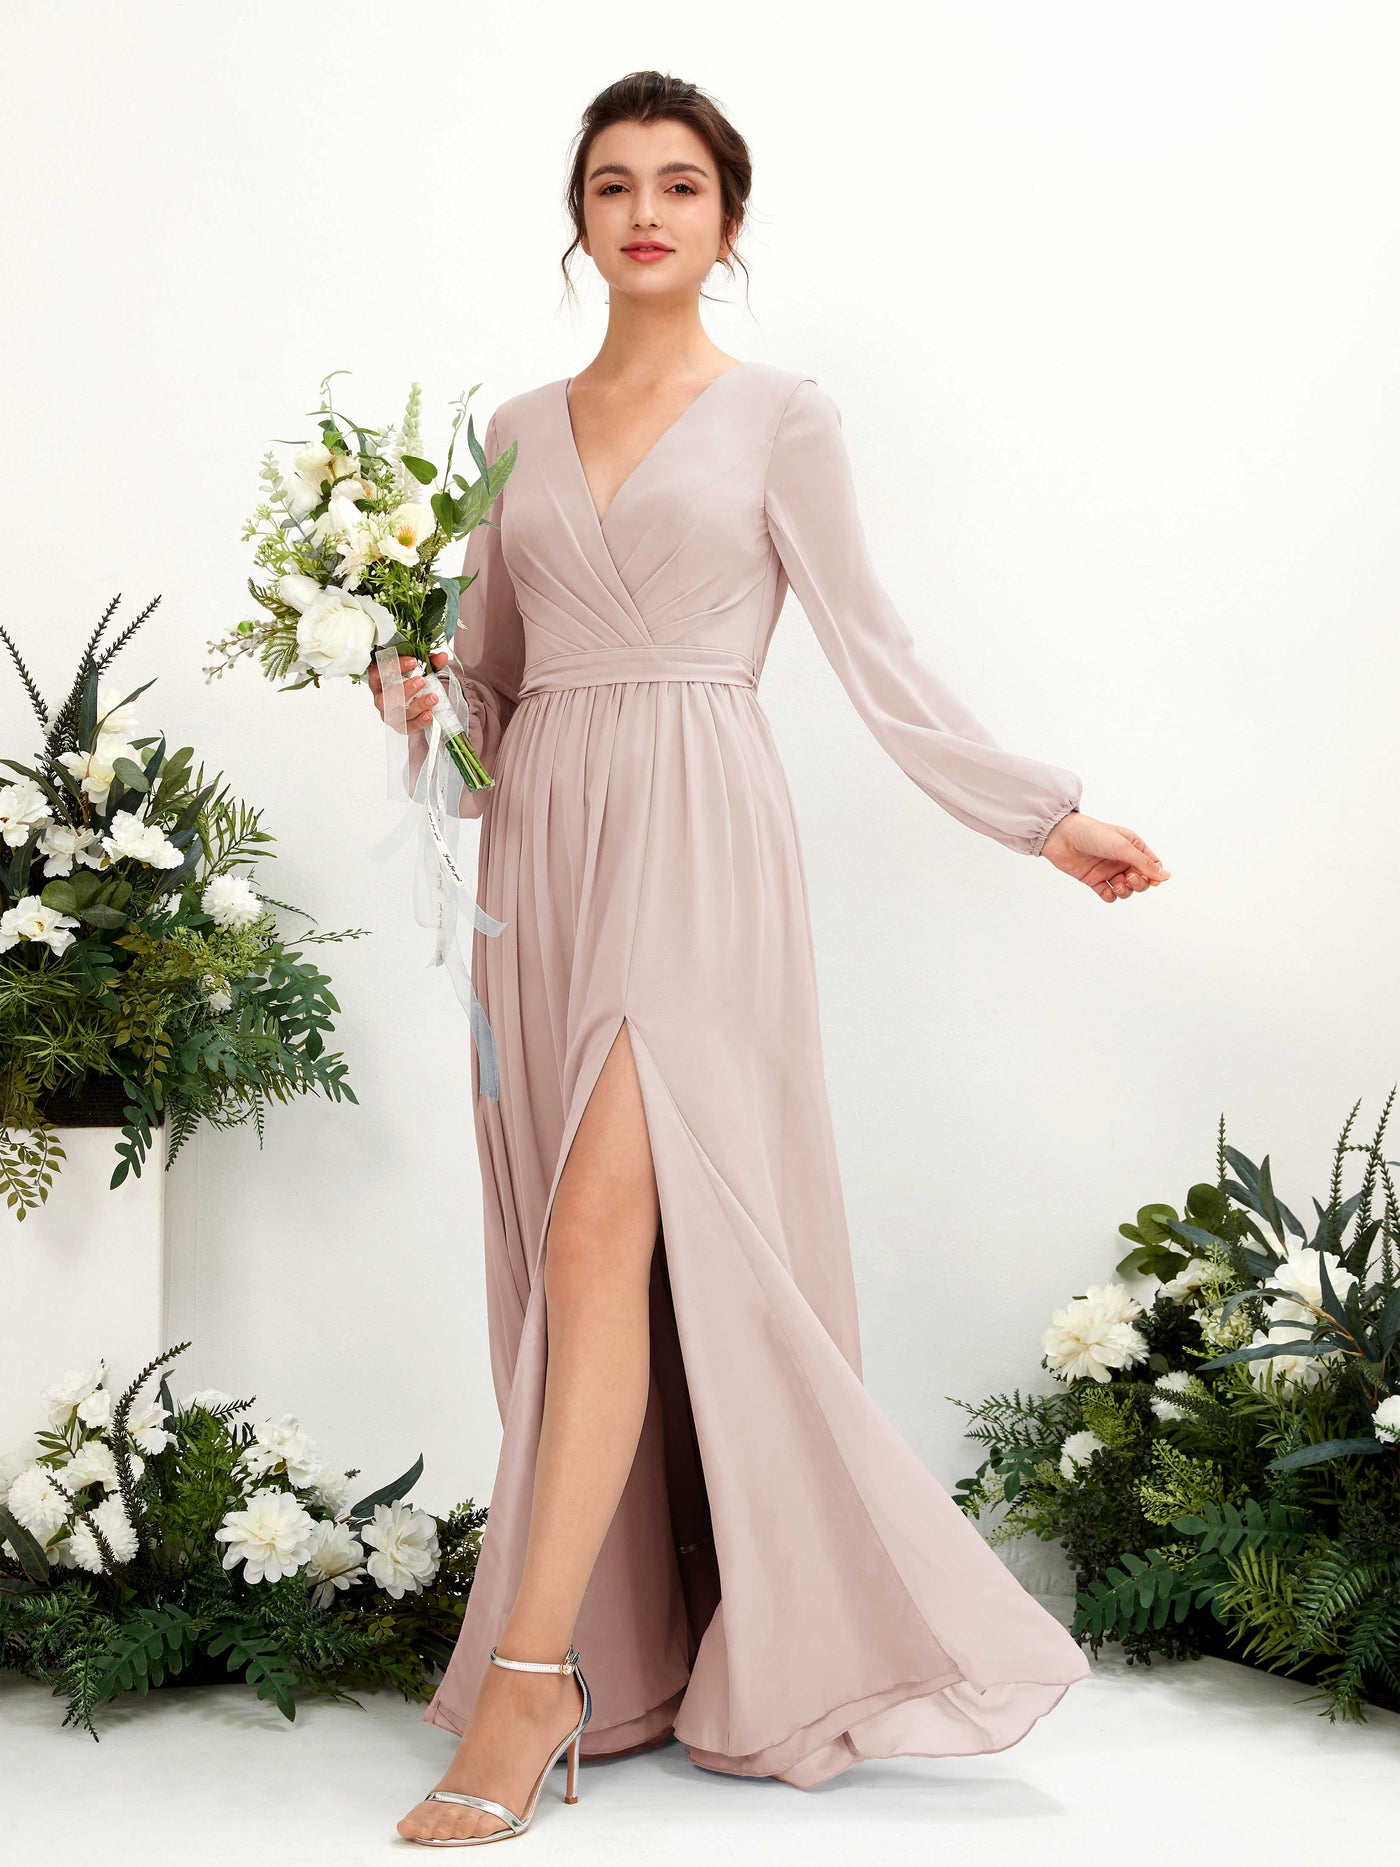 Biscotti Bridesmaid Dresses Bridesmaid Dress A-line Chiffon V-neck Full Length Long Sleeves Wedding Party Dress (81223835)#color_biscotti